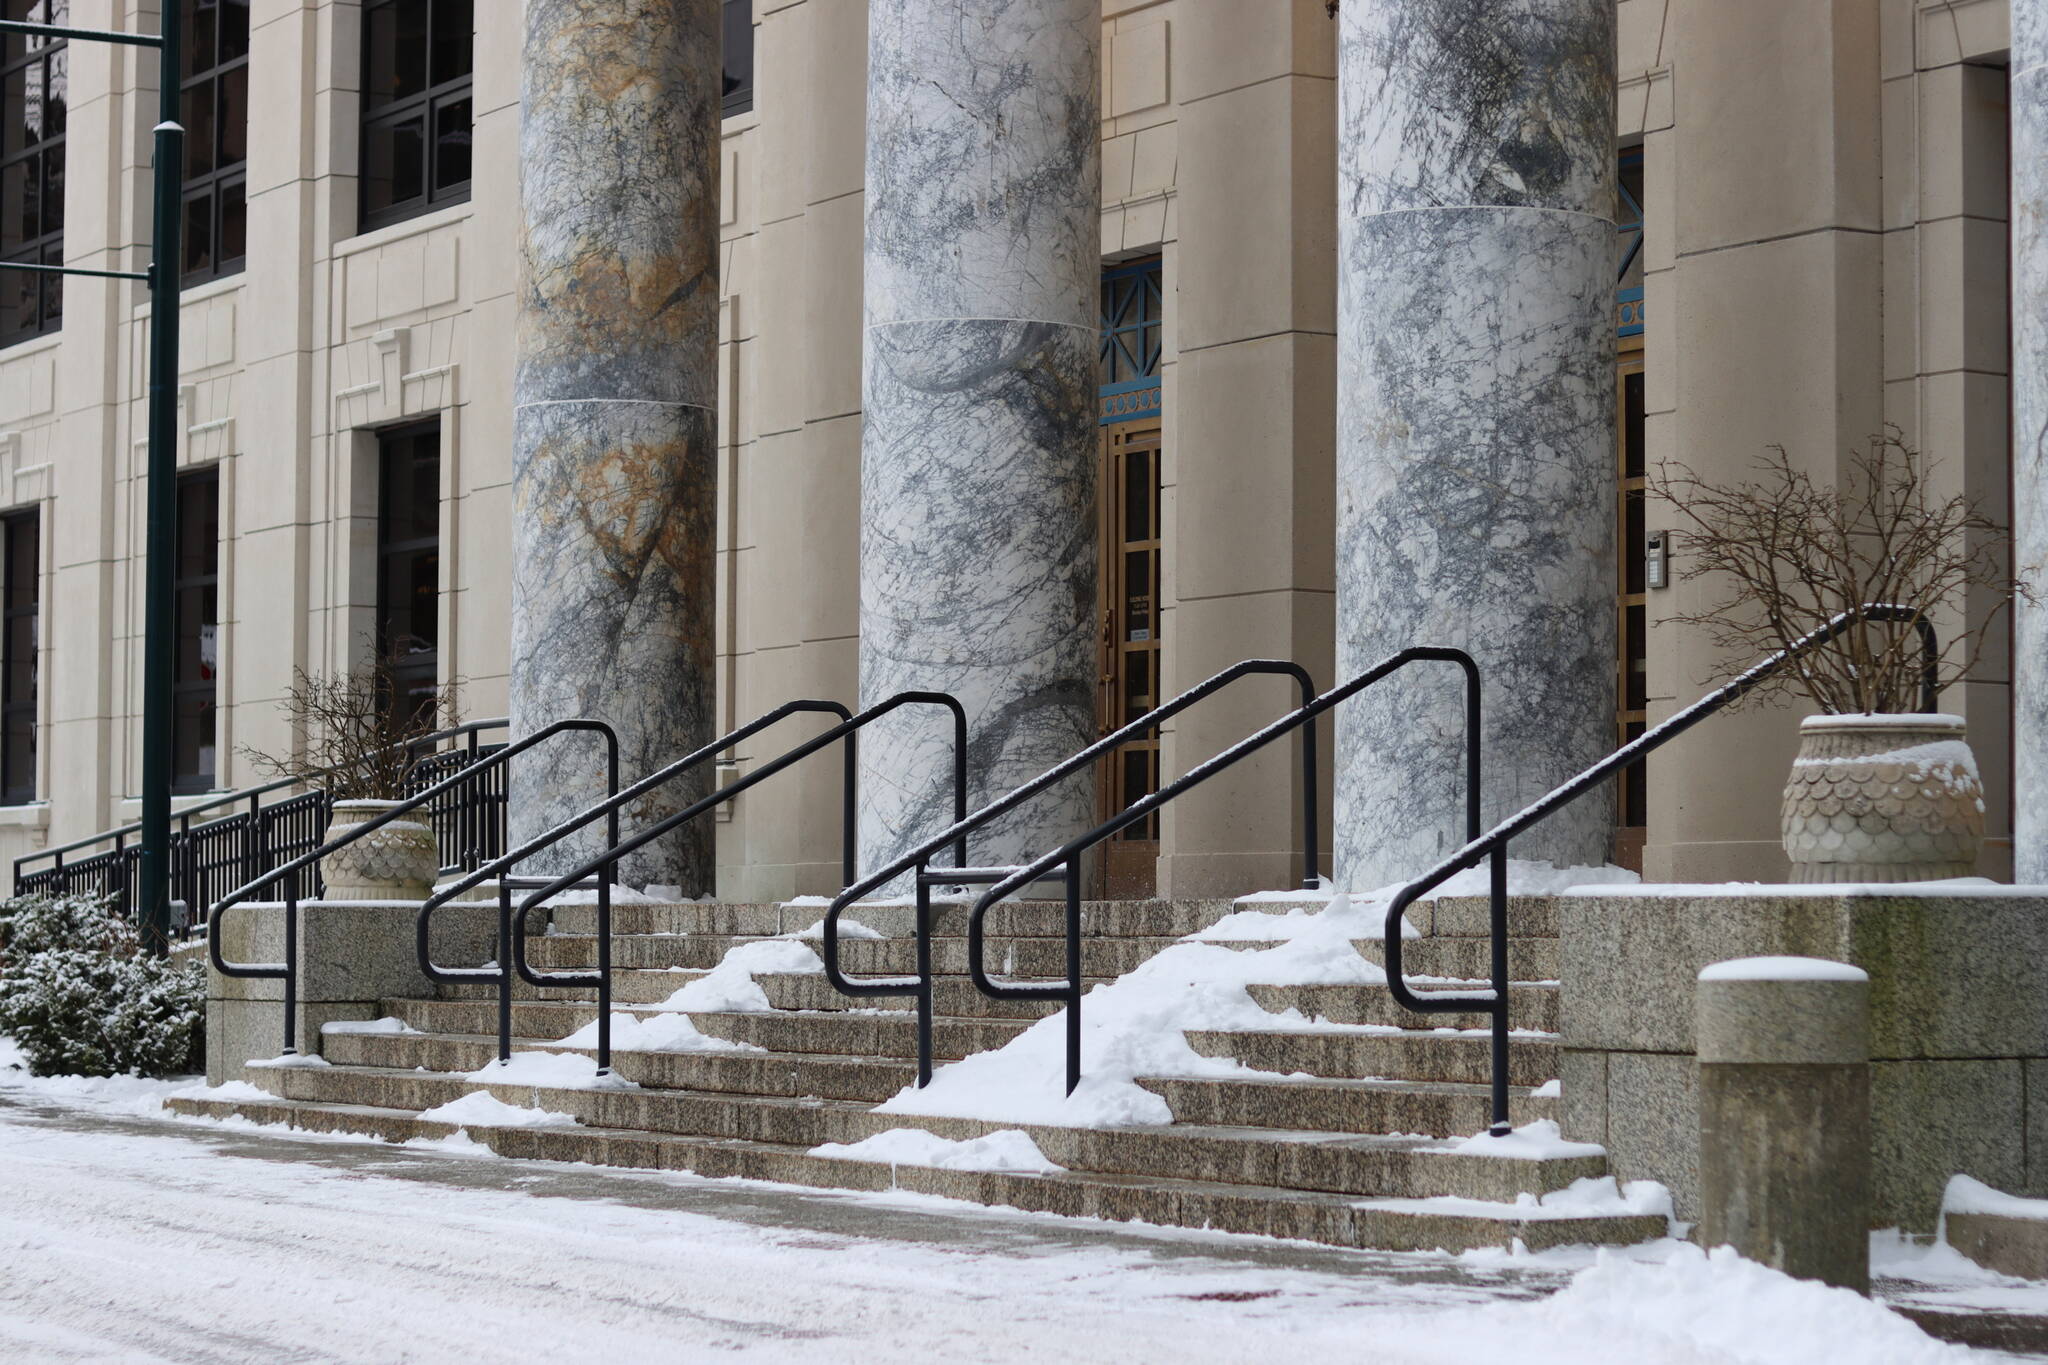 The snowy steps of the Alaska State Capitol are scheduled to see a Nativity scene during an hour-long gathering starting at 4 p.m. Friday which, in the words of a local organizer, is “for families to start their Gallery Walk in a prayerful manner.” But two Outside groups dedicated to placing Nativity scenes at as many state capitol buildings as possible are proclaiming it a victory against the so-called “war on Christmas.” The head of Alaska’s Legislative Affairs Agency, which has administrative oversight of the building, said the gathering is legal since a wide variety of events occur all the time, often with religious overtones, but the placement of a fixed or unattended display is illegal. (Jonson Kuhn / Juneau Empire)